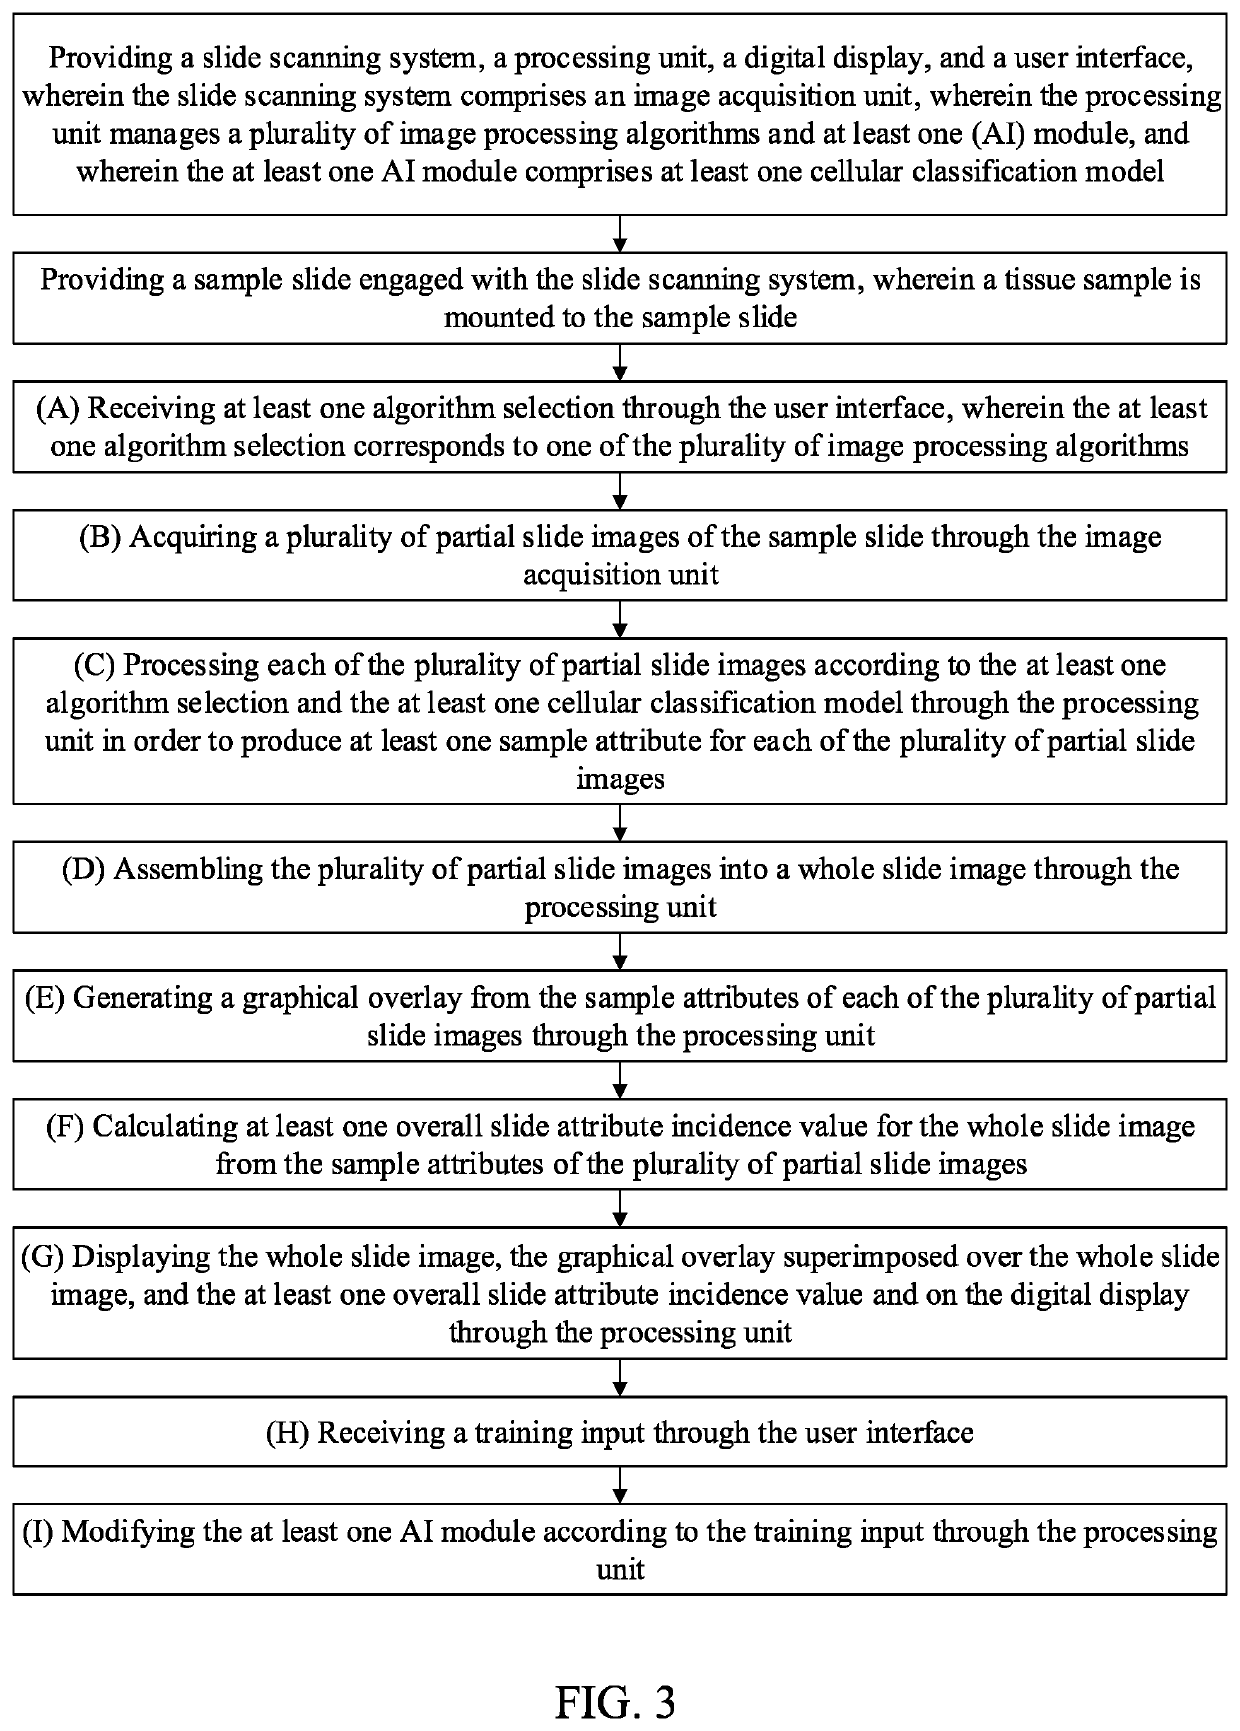 Method of Operation of An Artificial Intelligence-Equipped Specimen Scanning and Analysis Unit to Digitally Scan and Analyze Pathological Specimen Slides